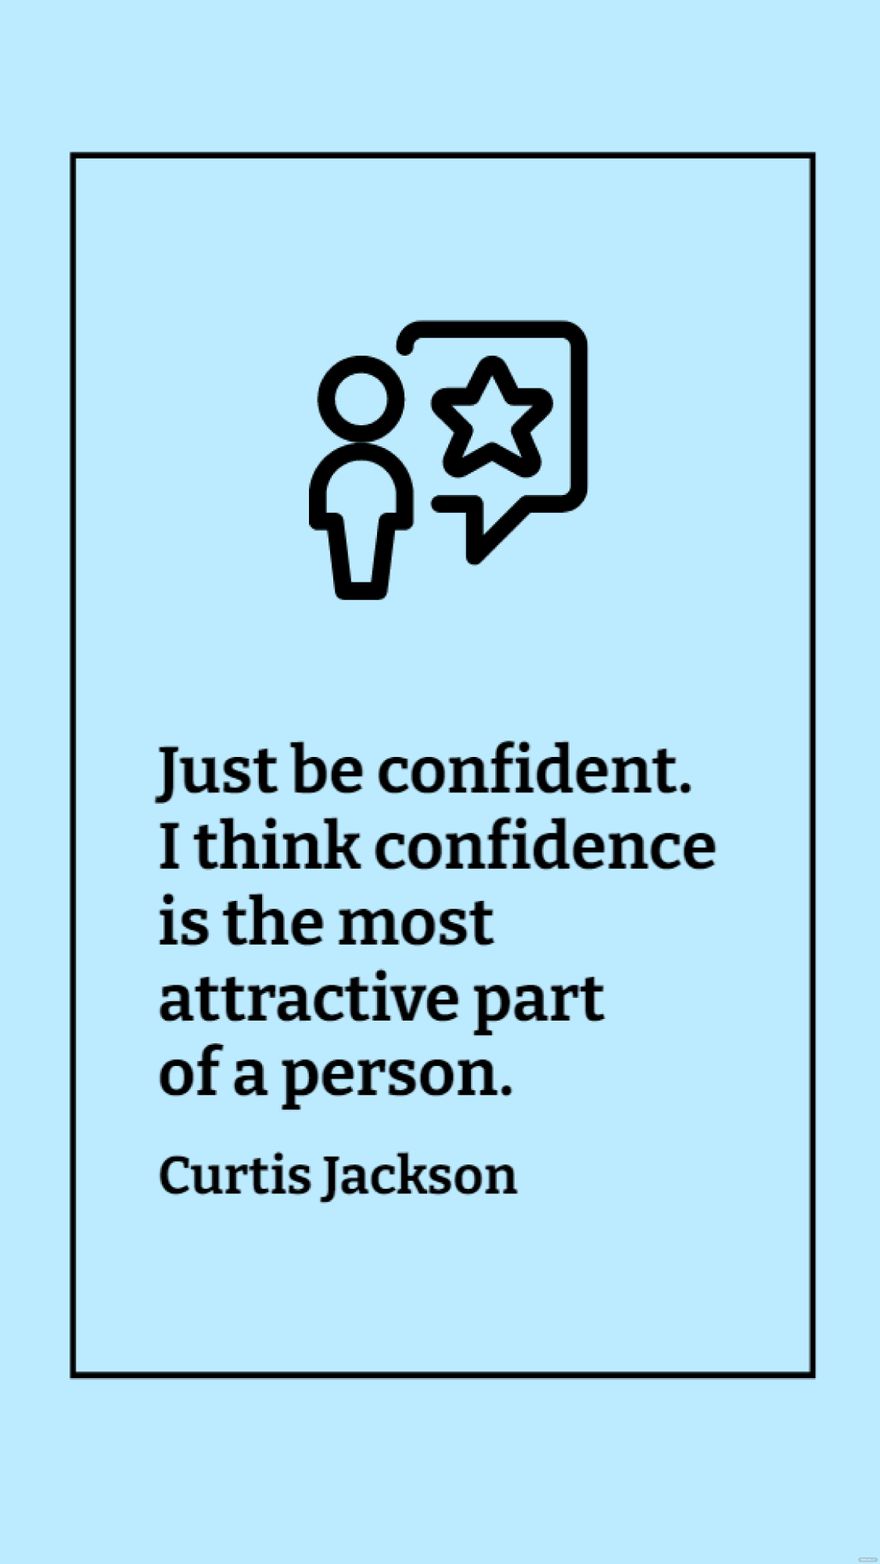 Curtis Jackson - Just be confident. I think confidence is the most attractive part of a person. in JPG